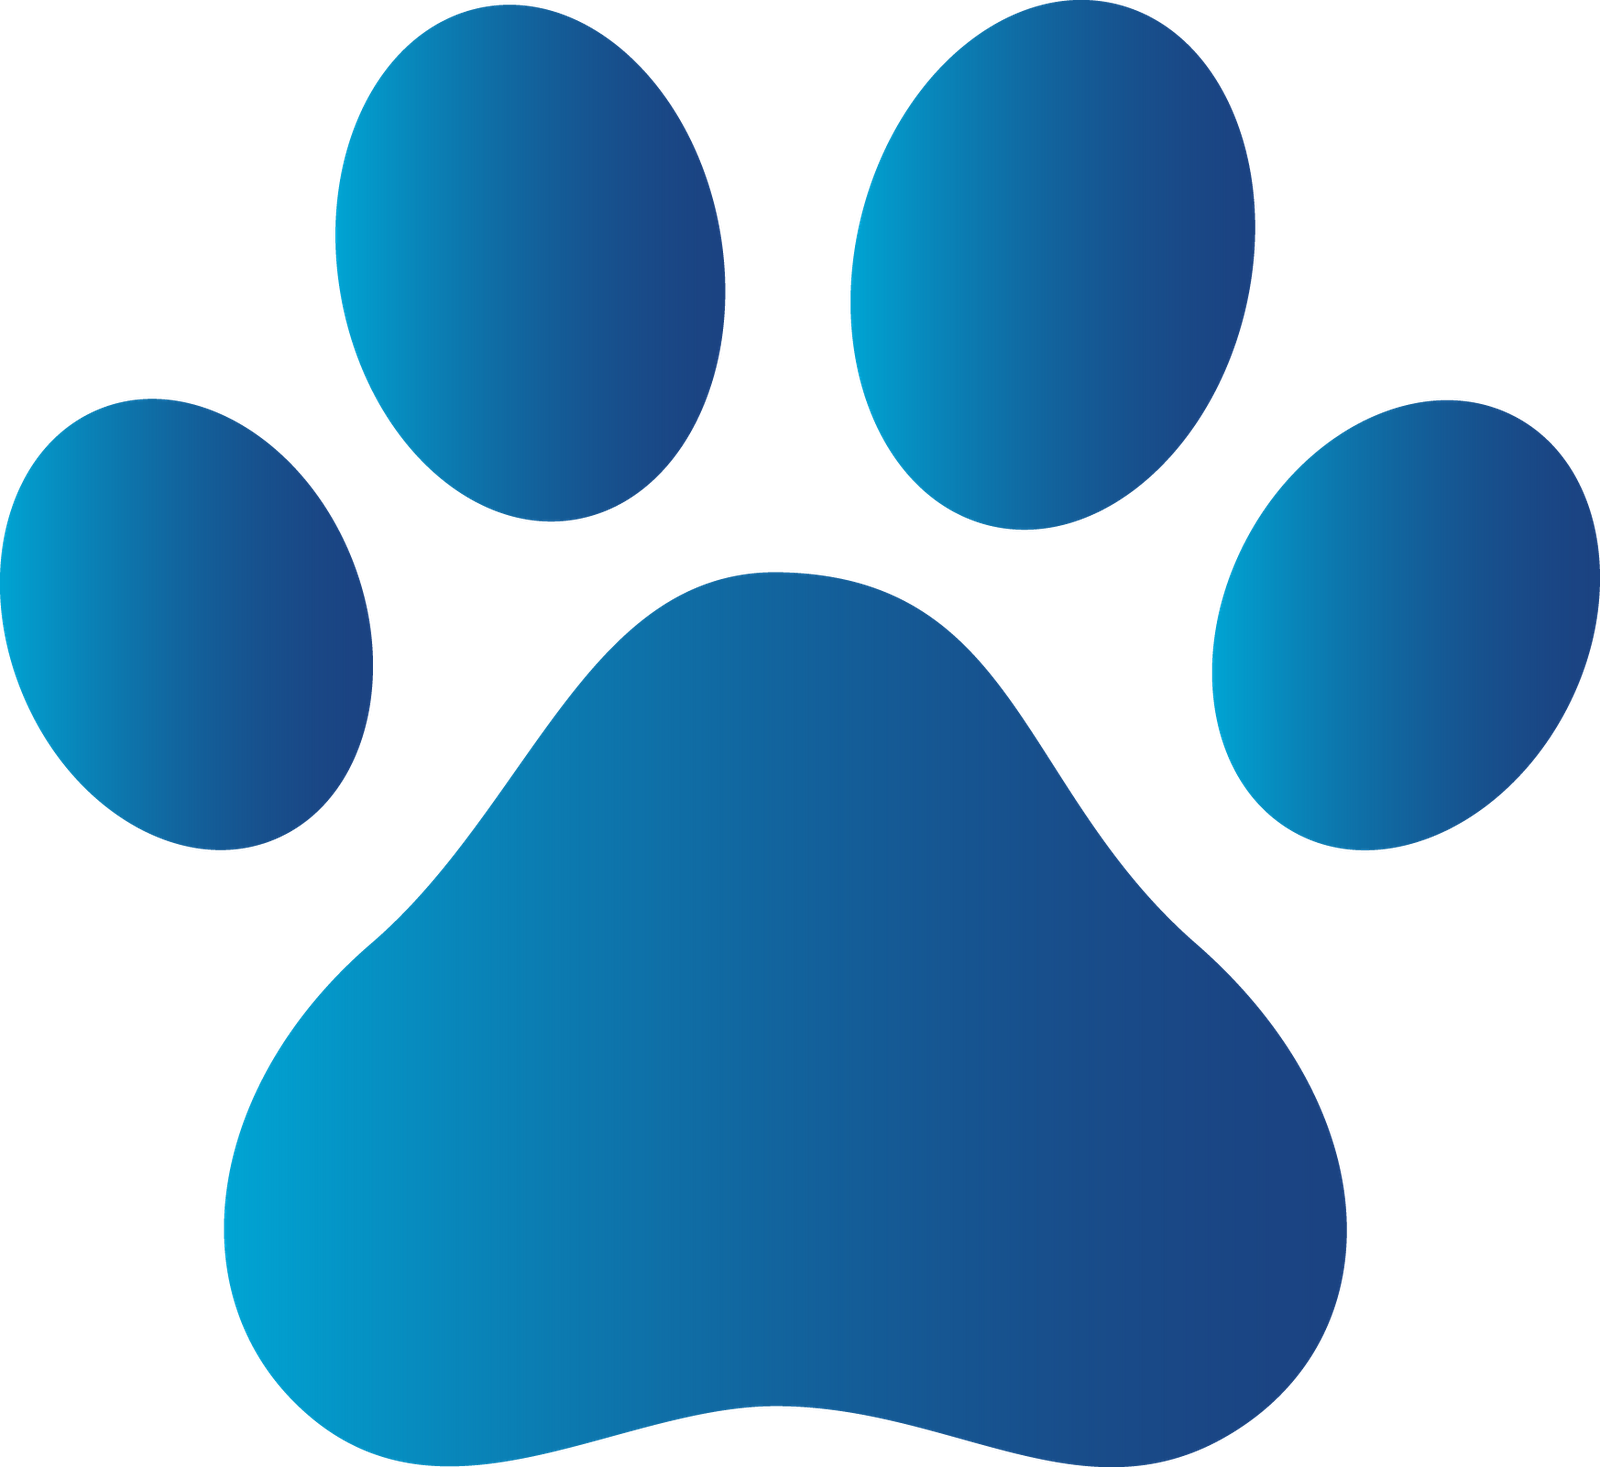 clipart of dog paw prints - photo #39